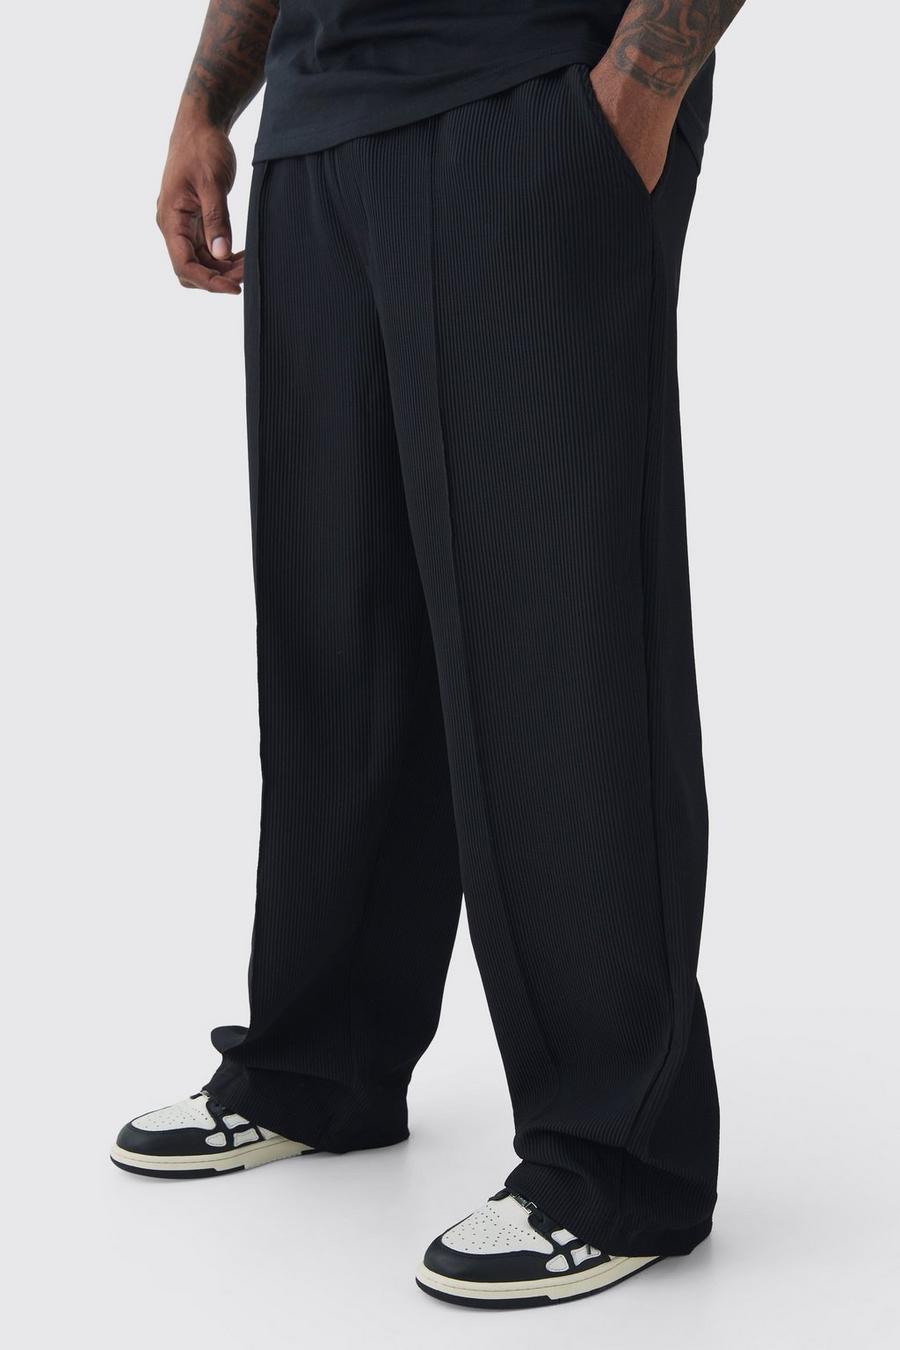 Black Plus Elastic Waist Relaxed Fit Pleated Trouser